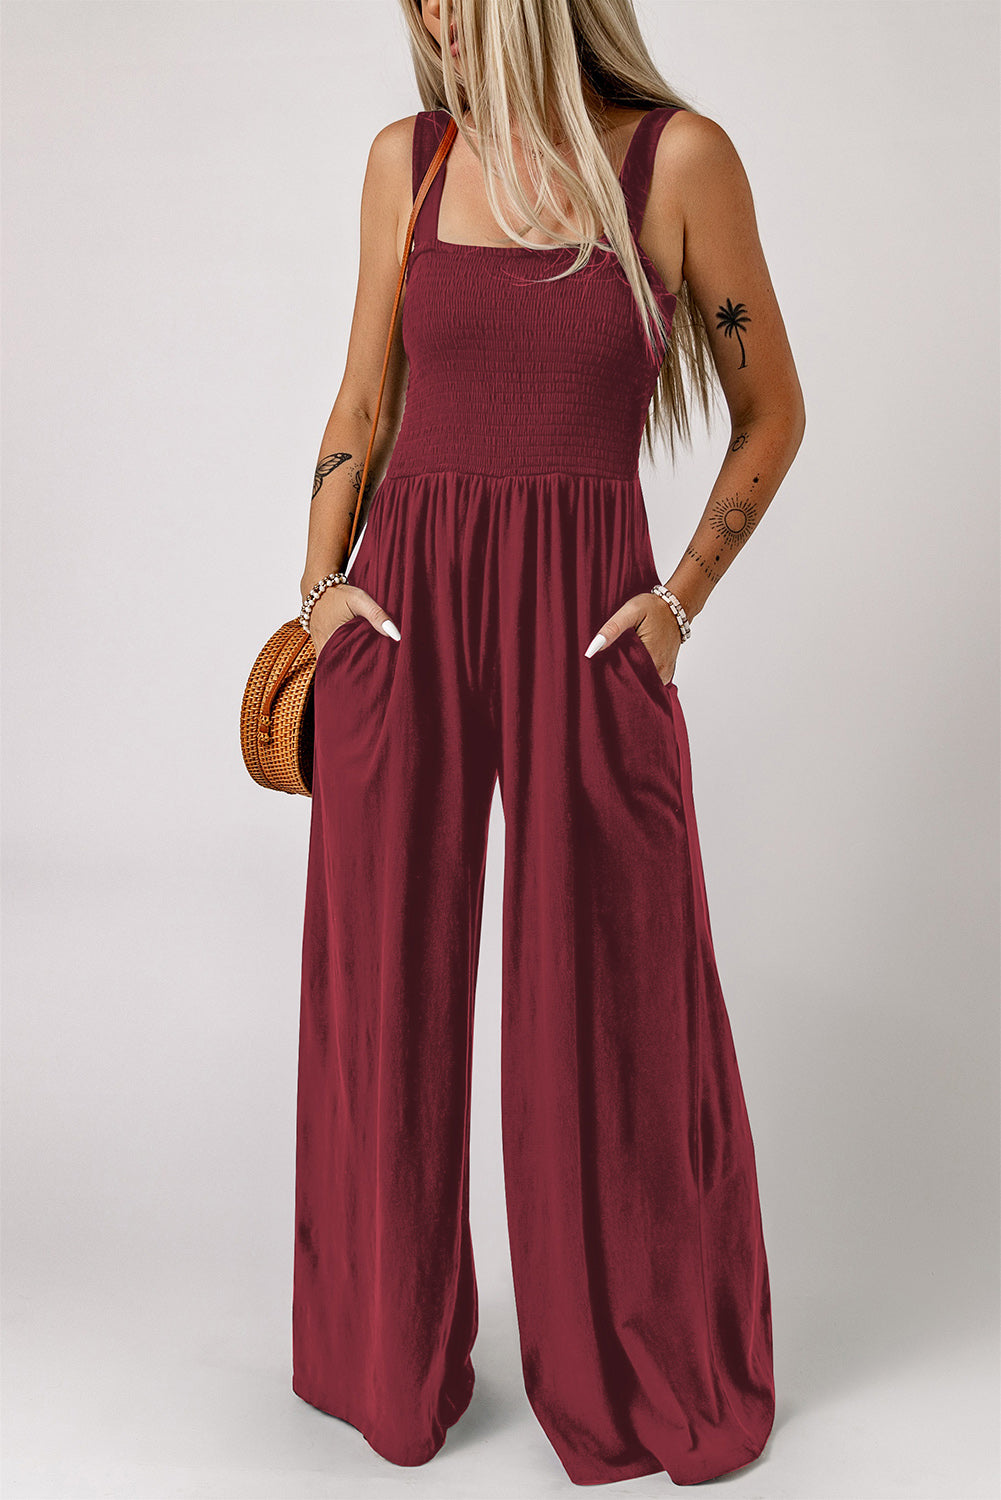 Smocked Square Neck Wide Leg Jumpsuit with Pockets Sunset and Swim Wine S 